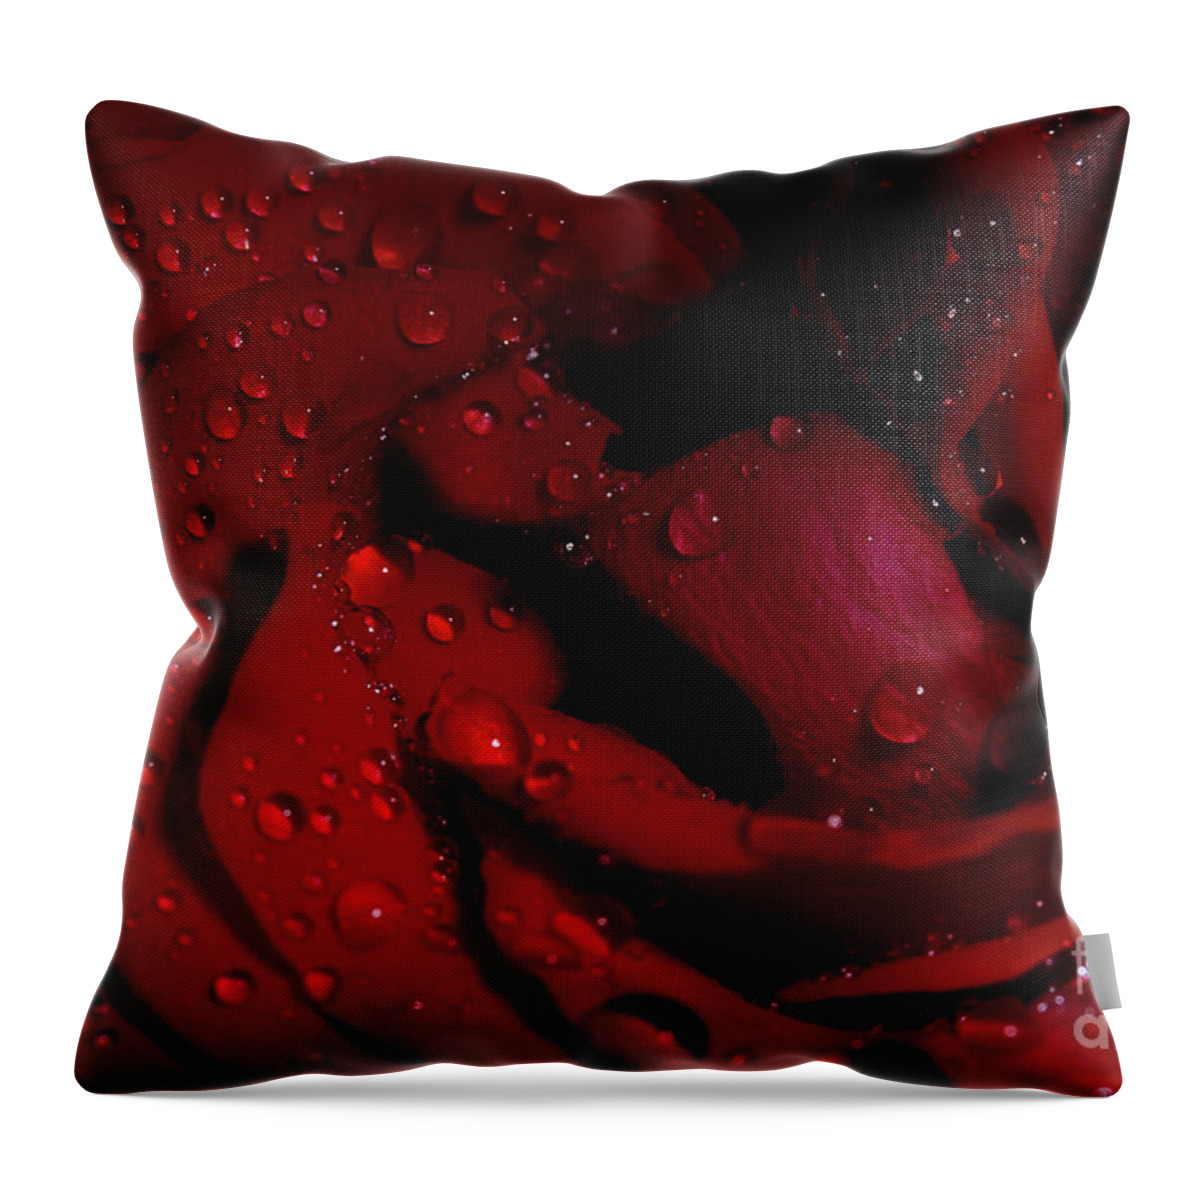 Rose Throw Pillow featuring the photograph Red Rose Layers by Mike Eingle